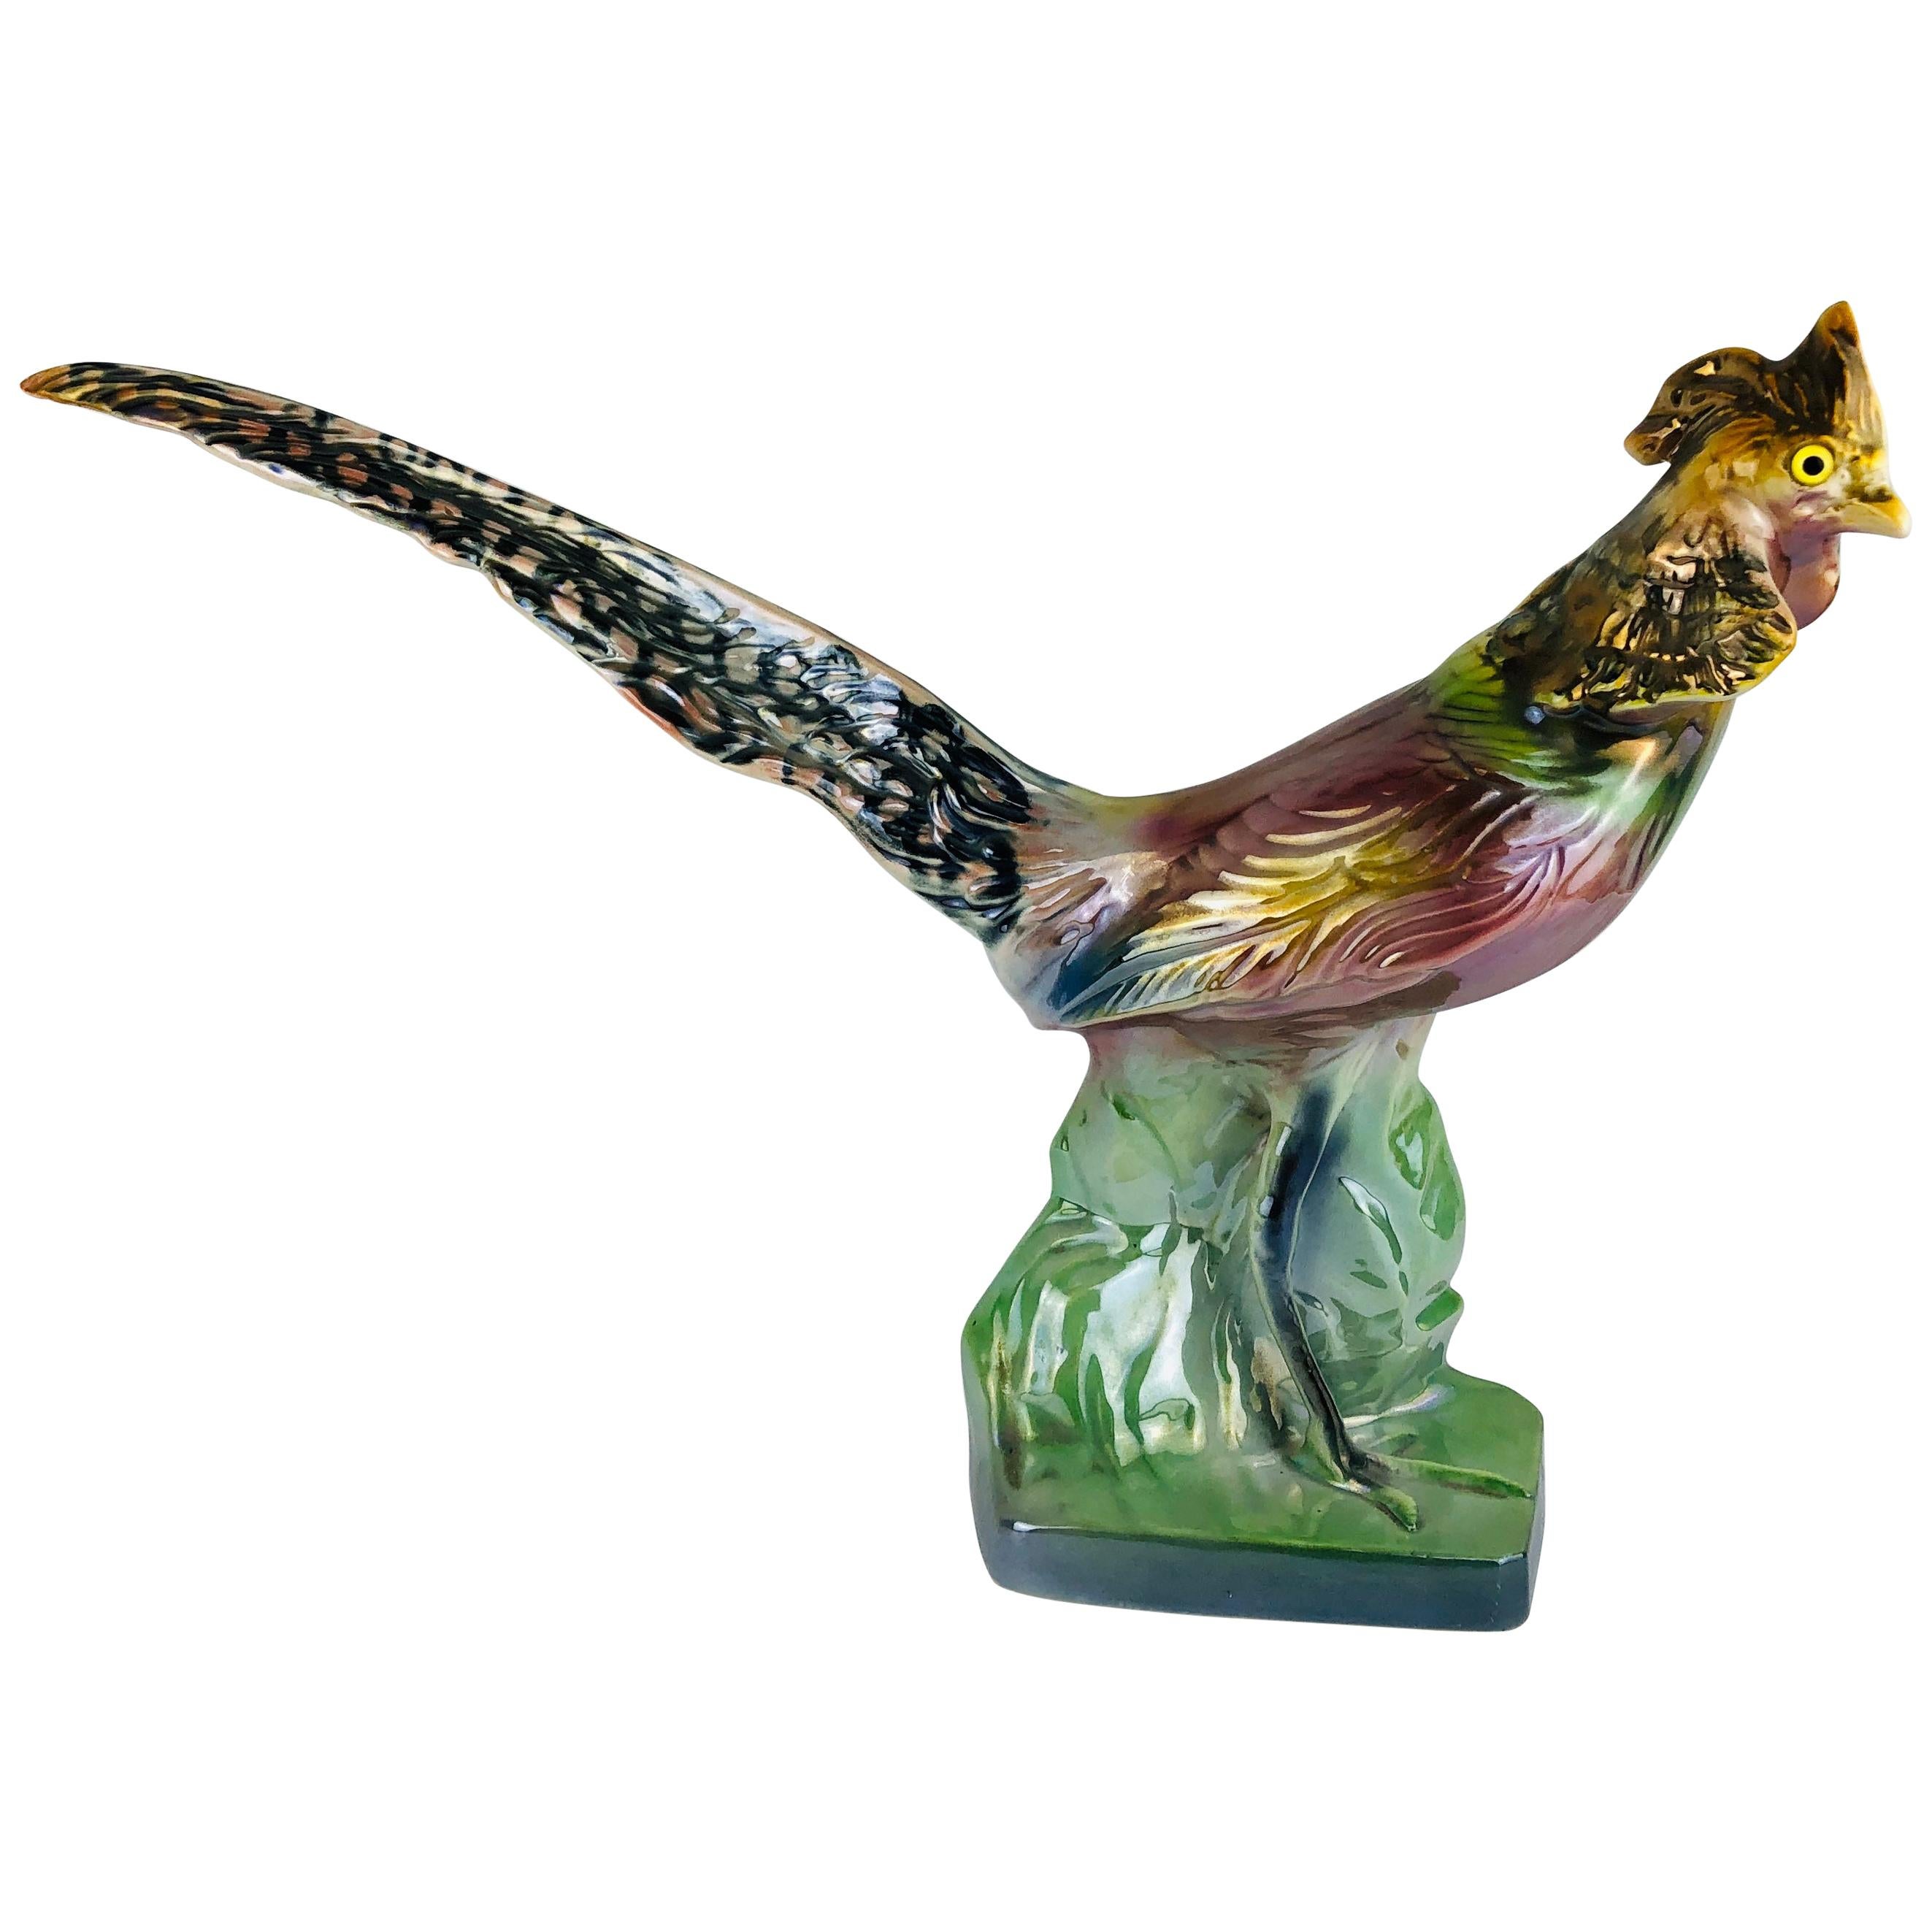 Early 20th Century Sculpted Ceramic Pheasant Bird Figure from H. Bequet